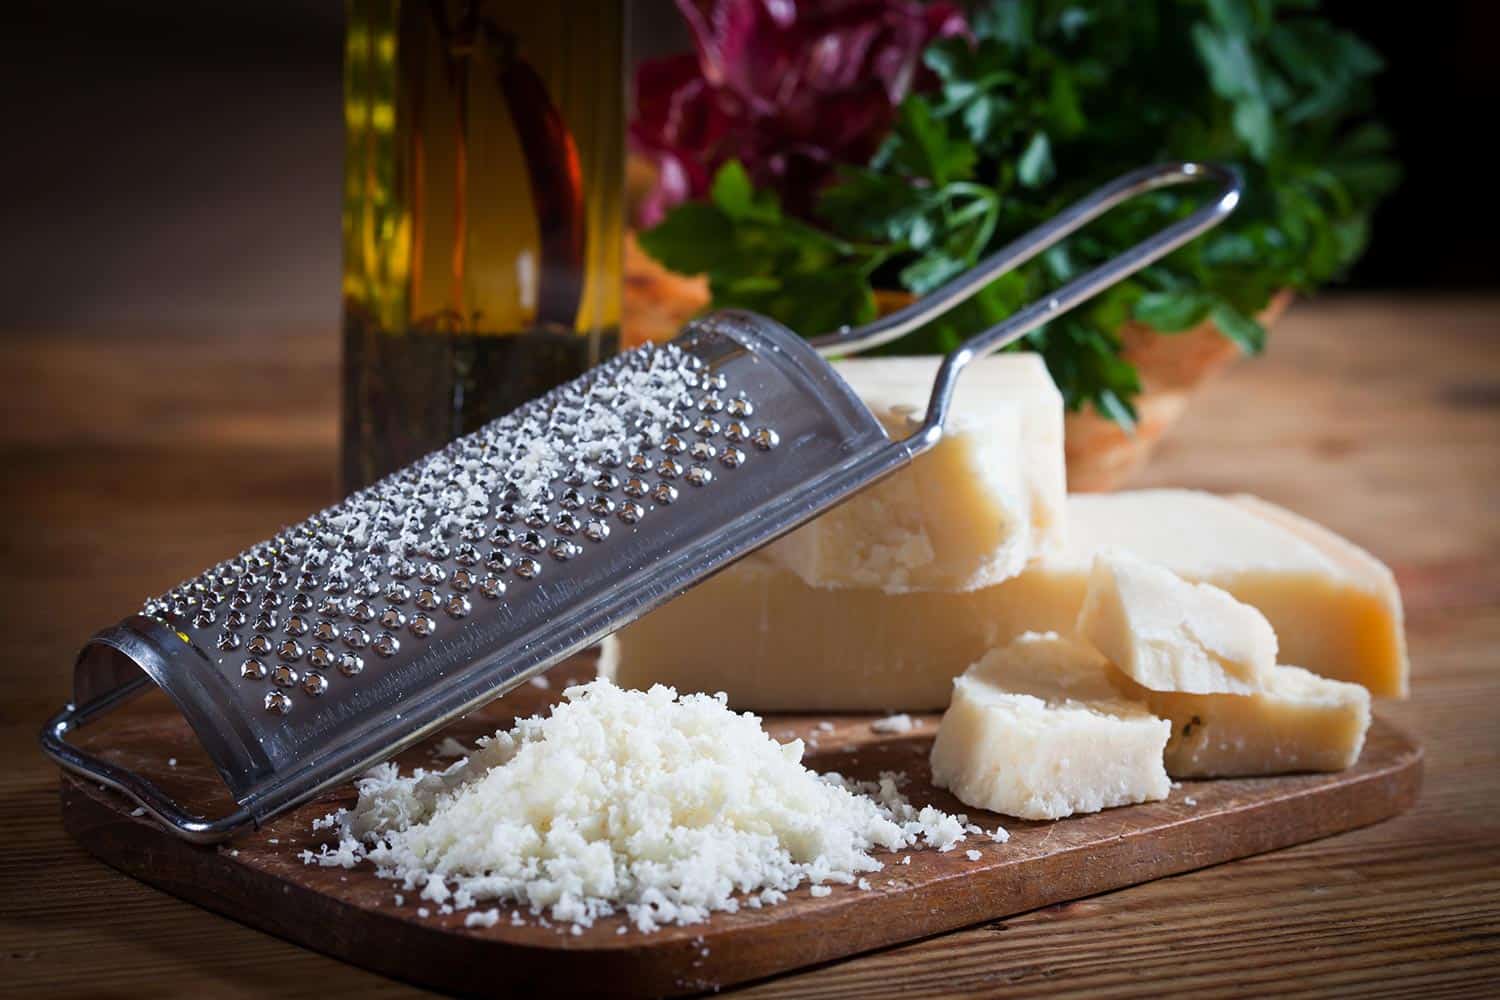 Parmesan cheese with grater